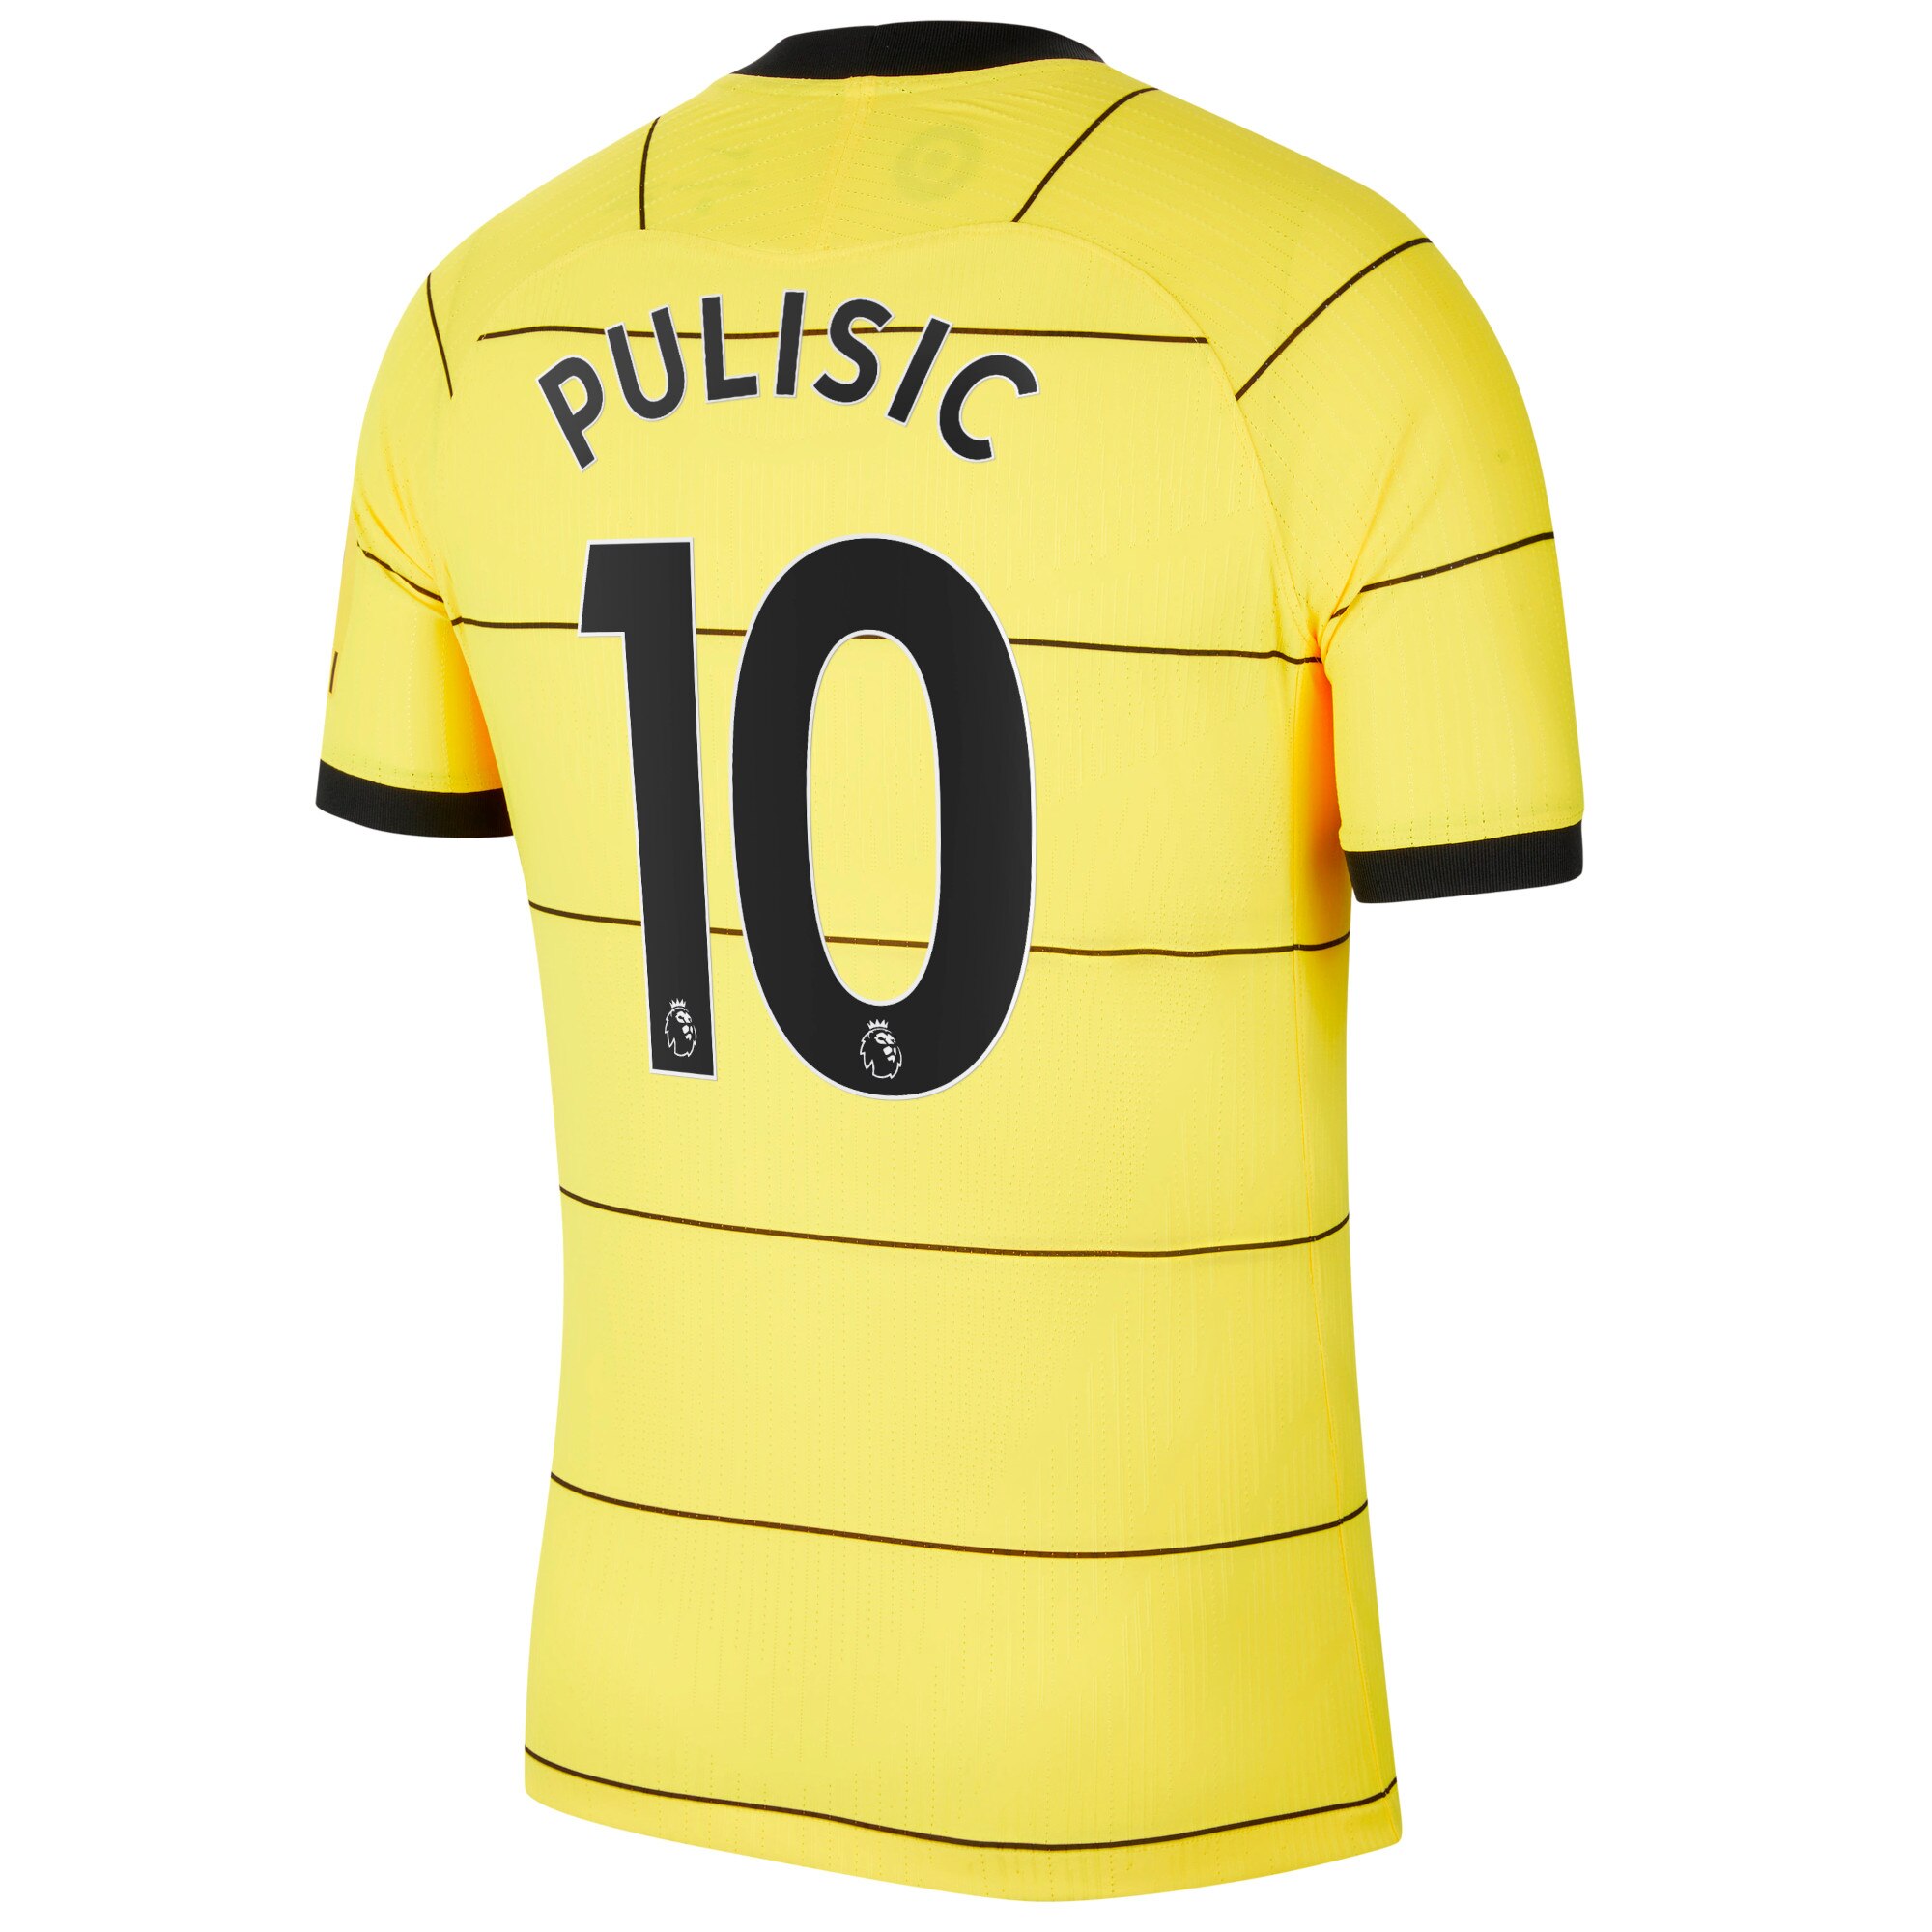 Chelsea Away Vapor Match Shirt 2021-22 with Pulisic 10 printing